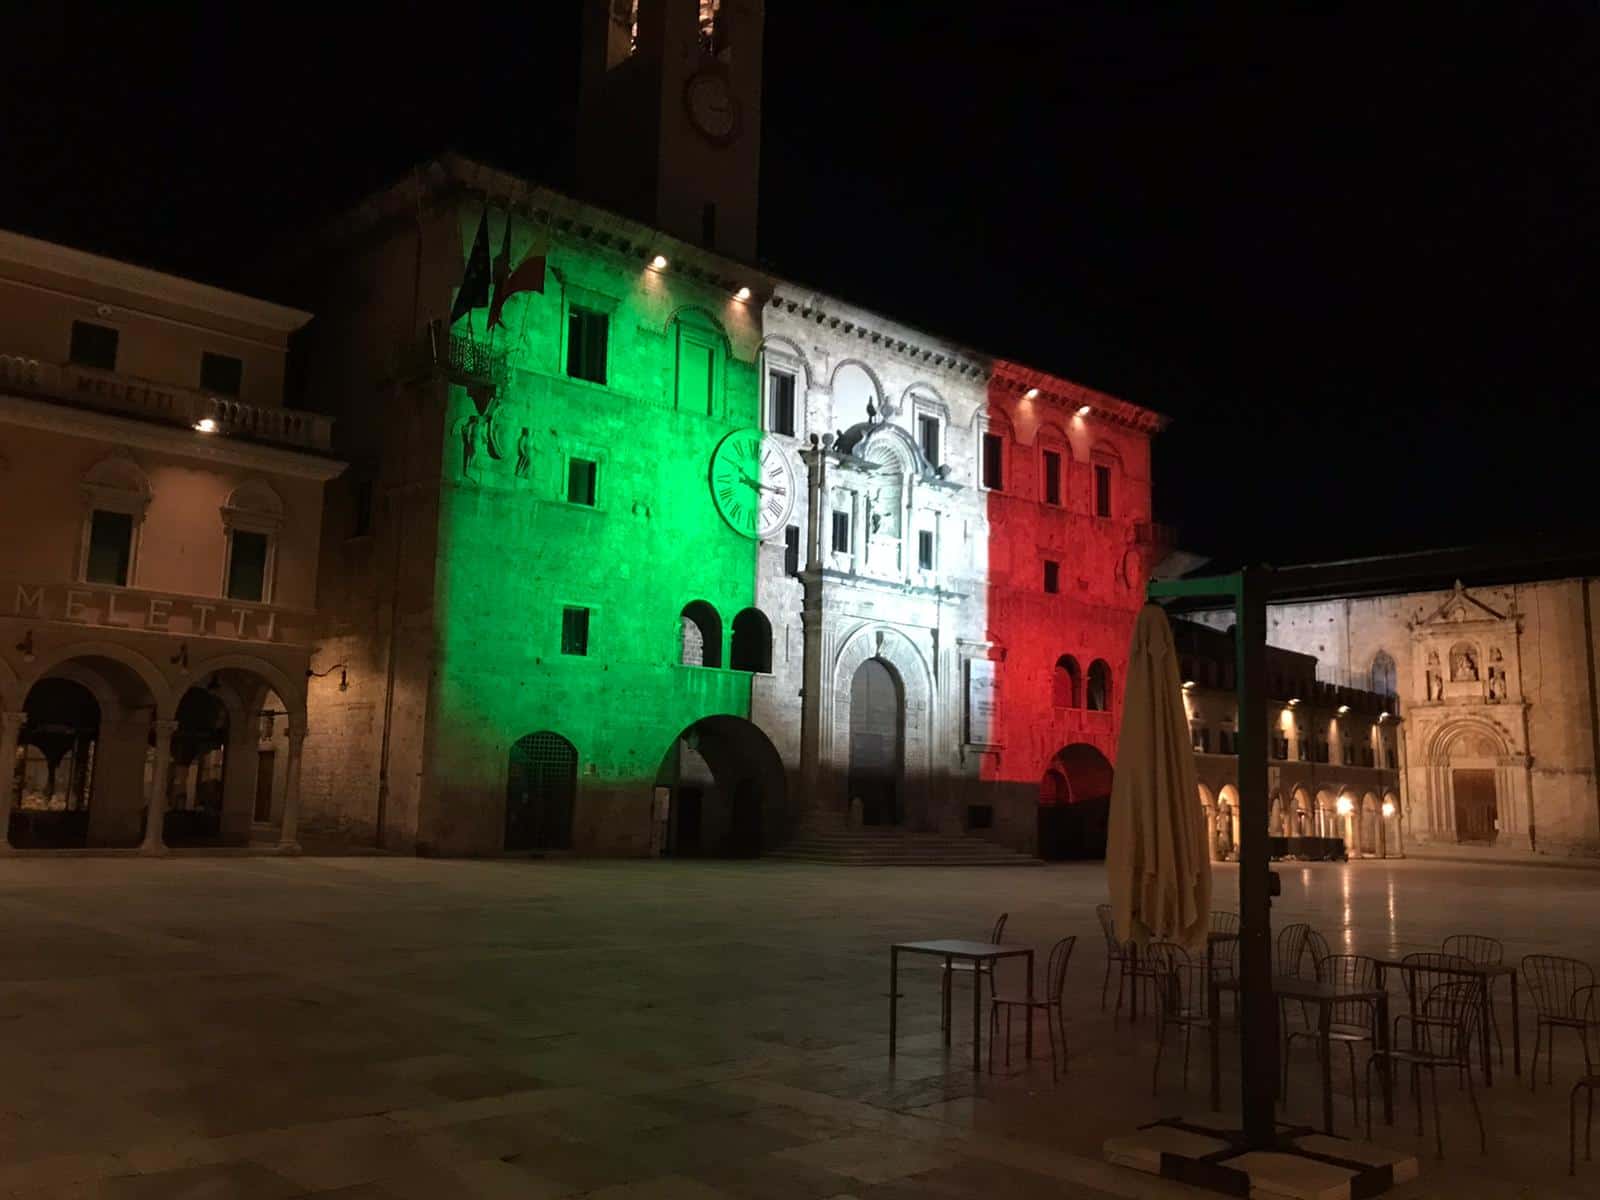 projection of the Ascoli flag